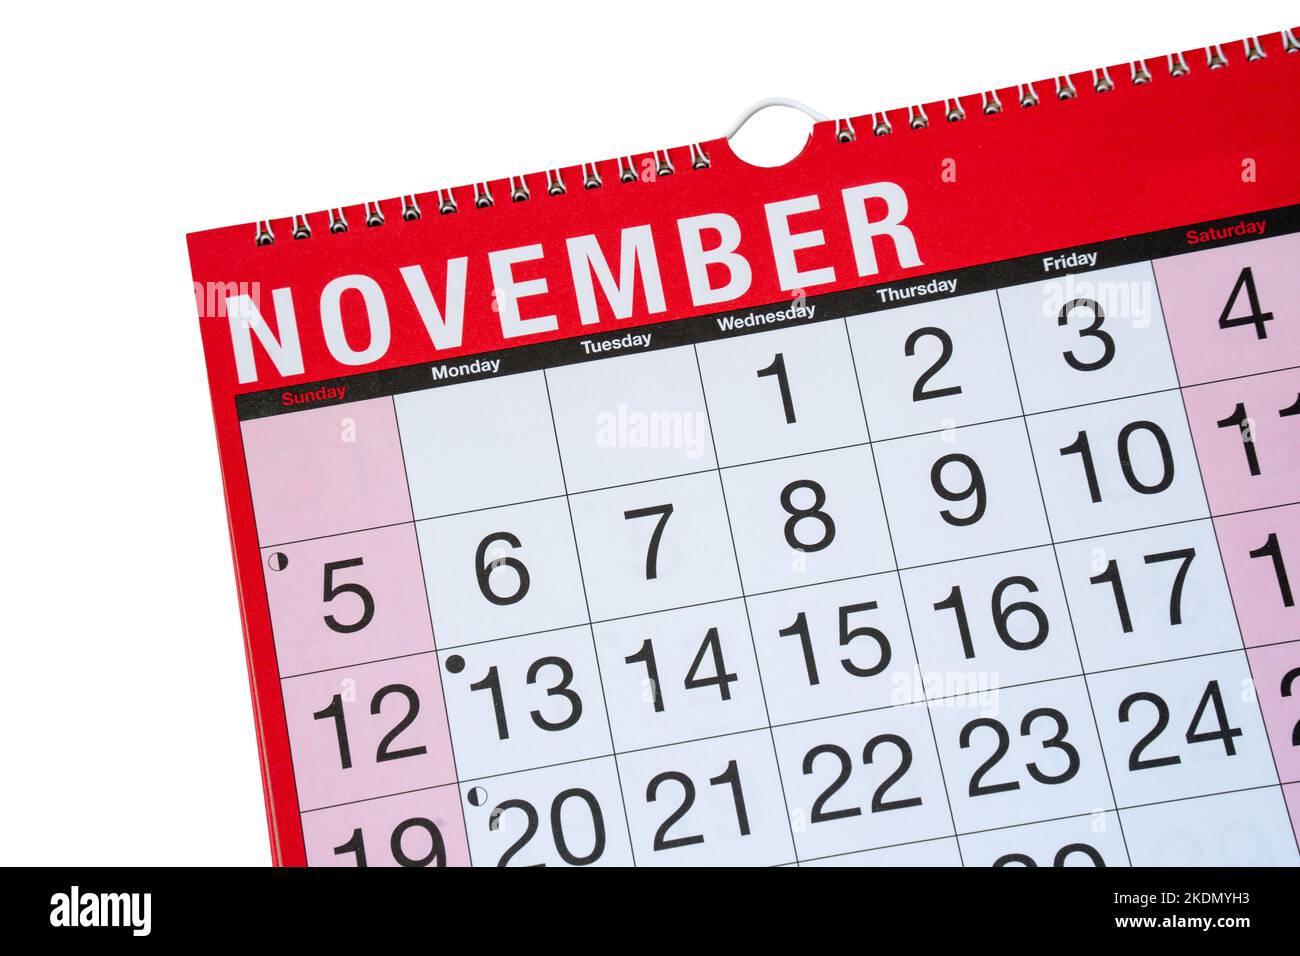 Calendar concept, month and dates with November selected Stock Photo